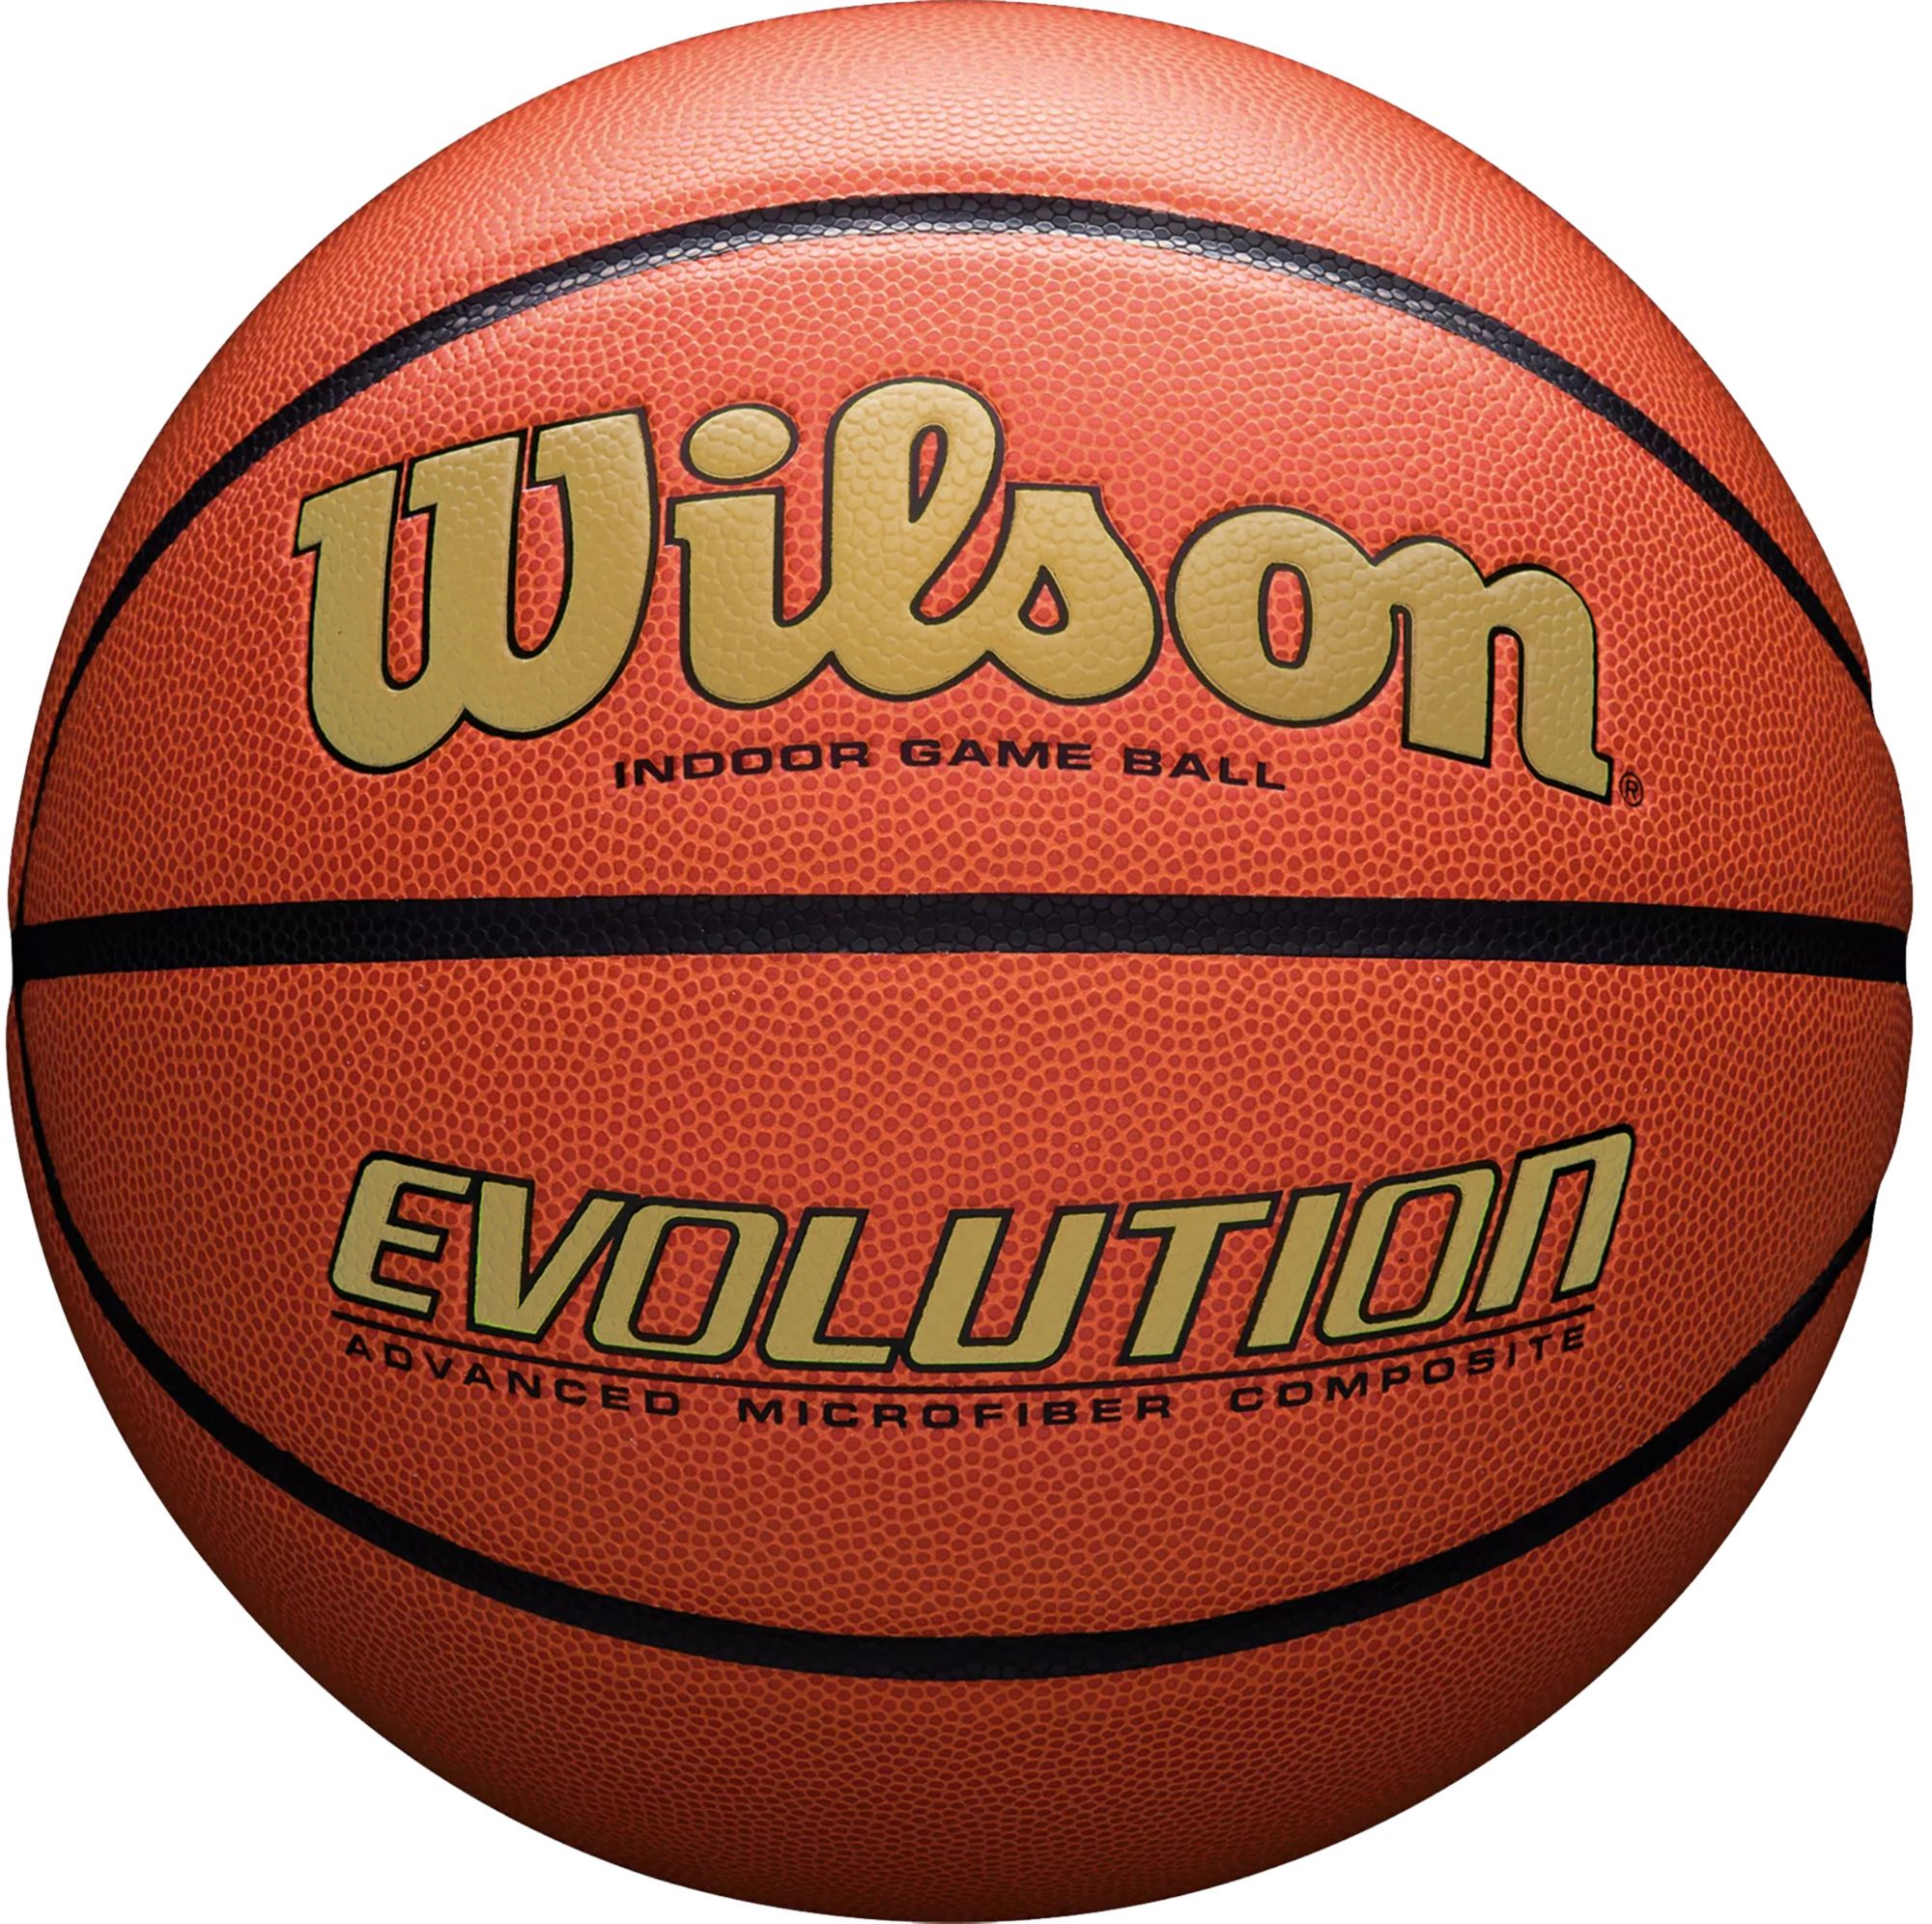 Shop Basketball Gear & Equipment - Best Price at DICK'S